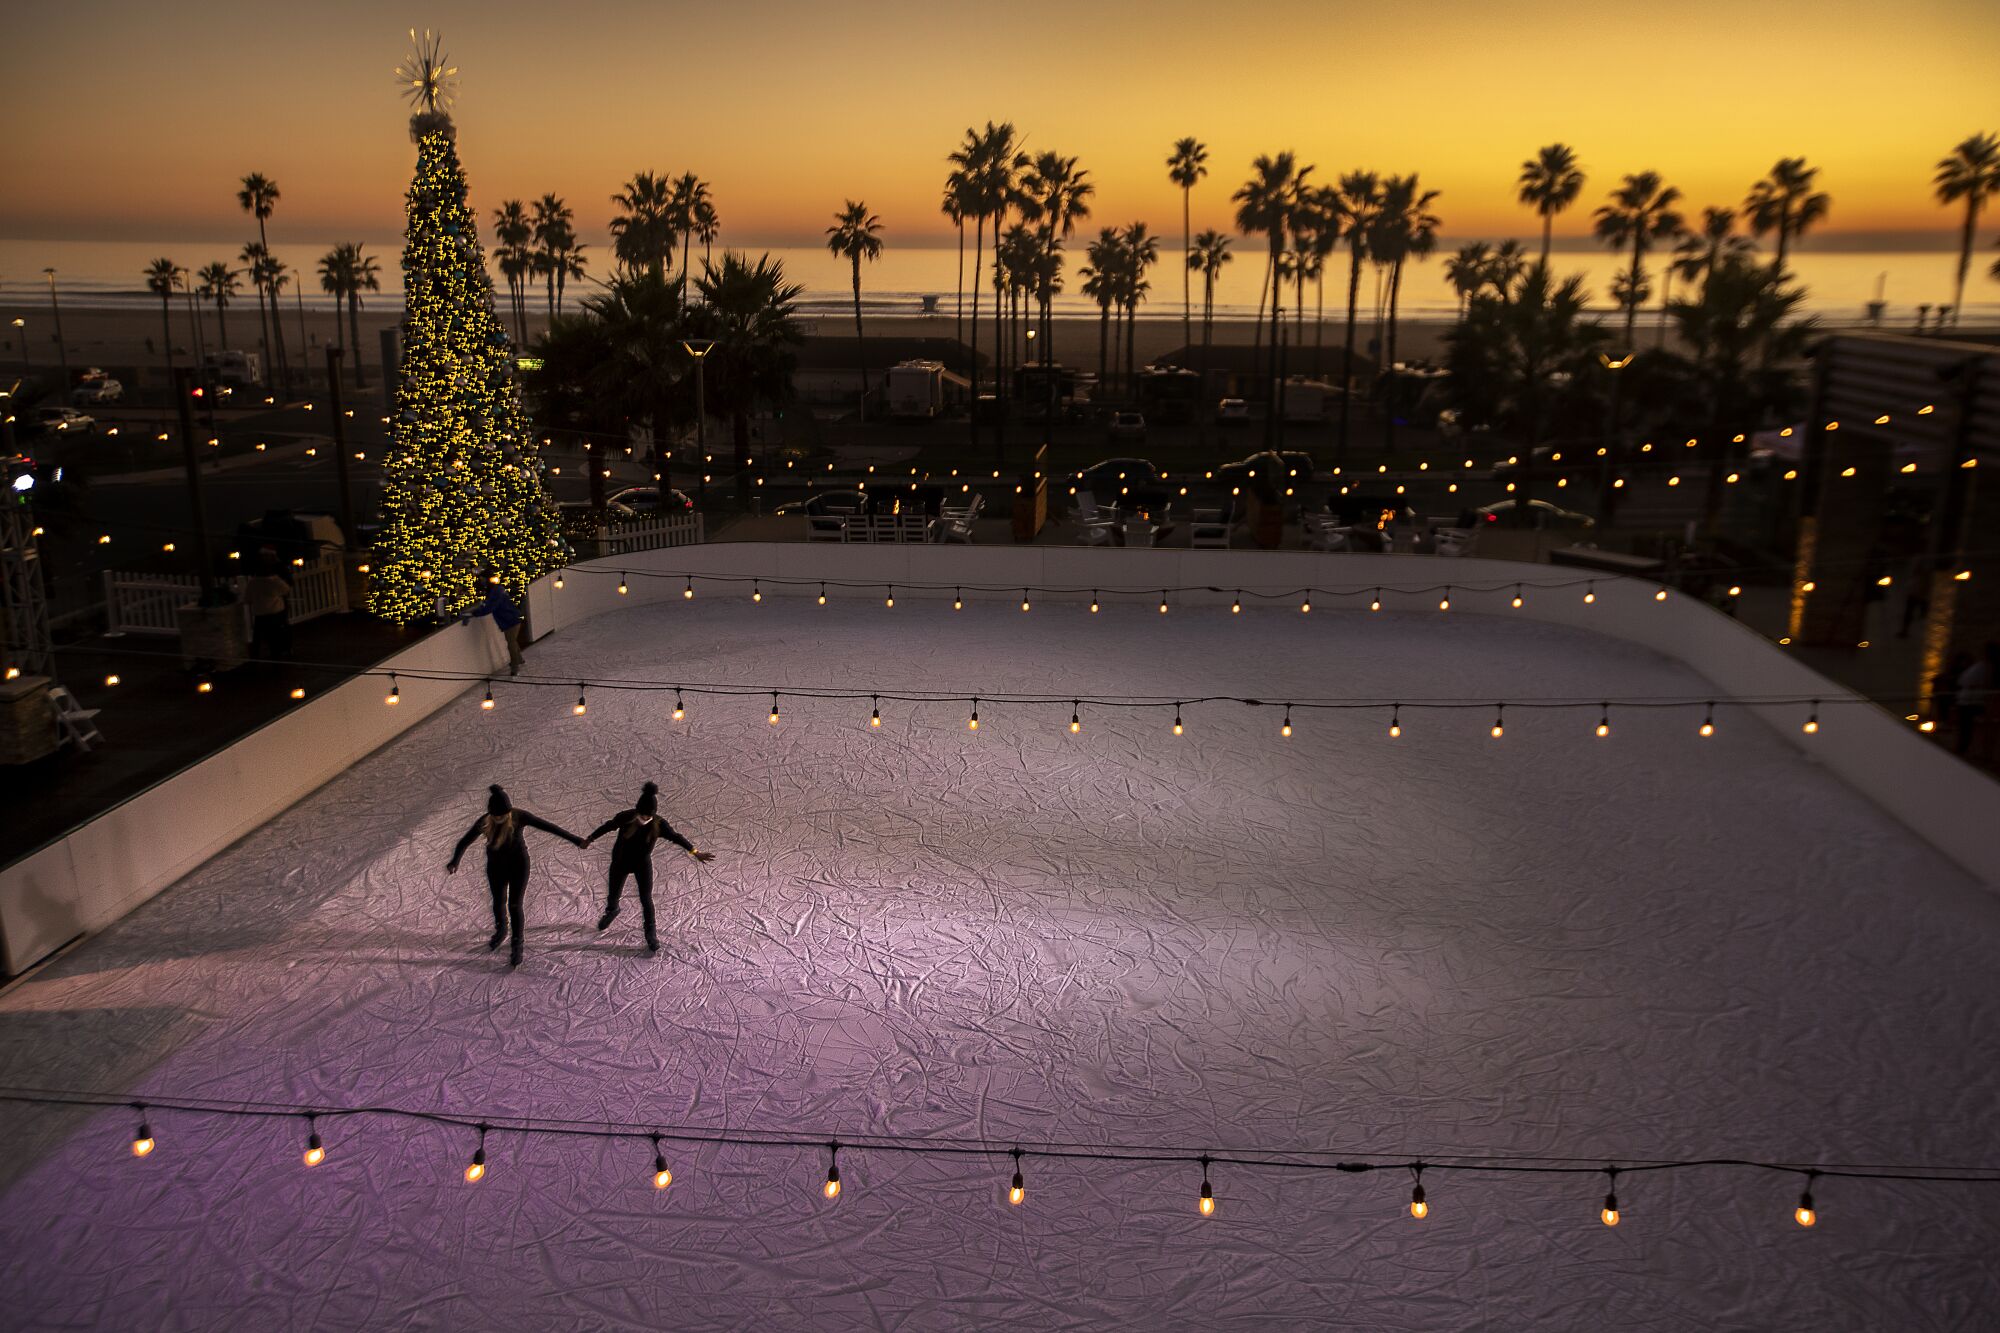 Two people ice skate on an outdoor rink. In the background is a lighted Christmas tree, palm trees and the ocean.